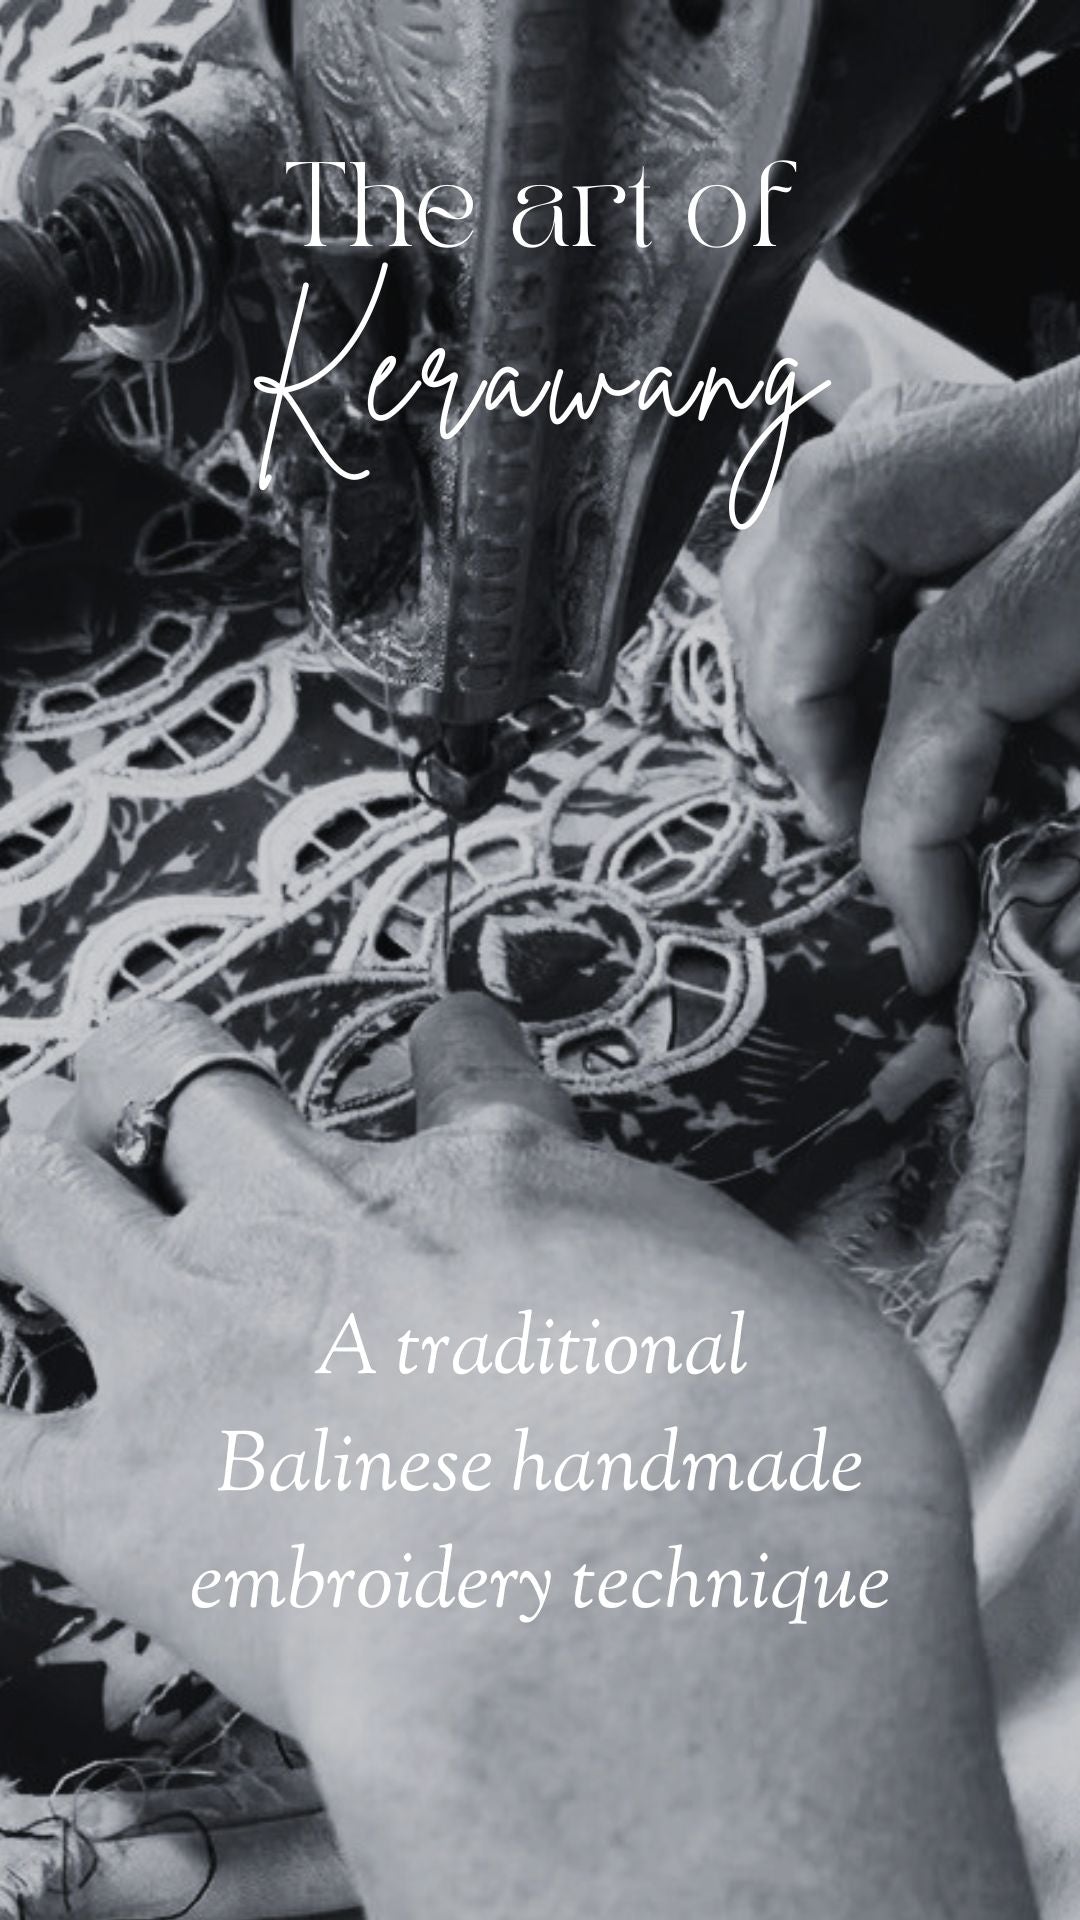 The Art of Kerawang Embroidery: A Beautiful Heritage Craft